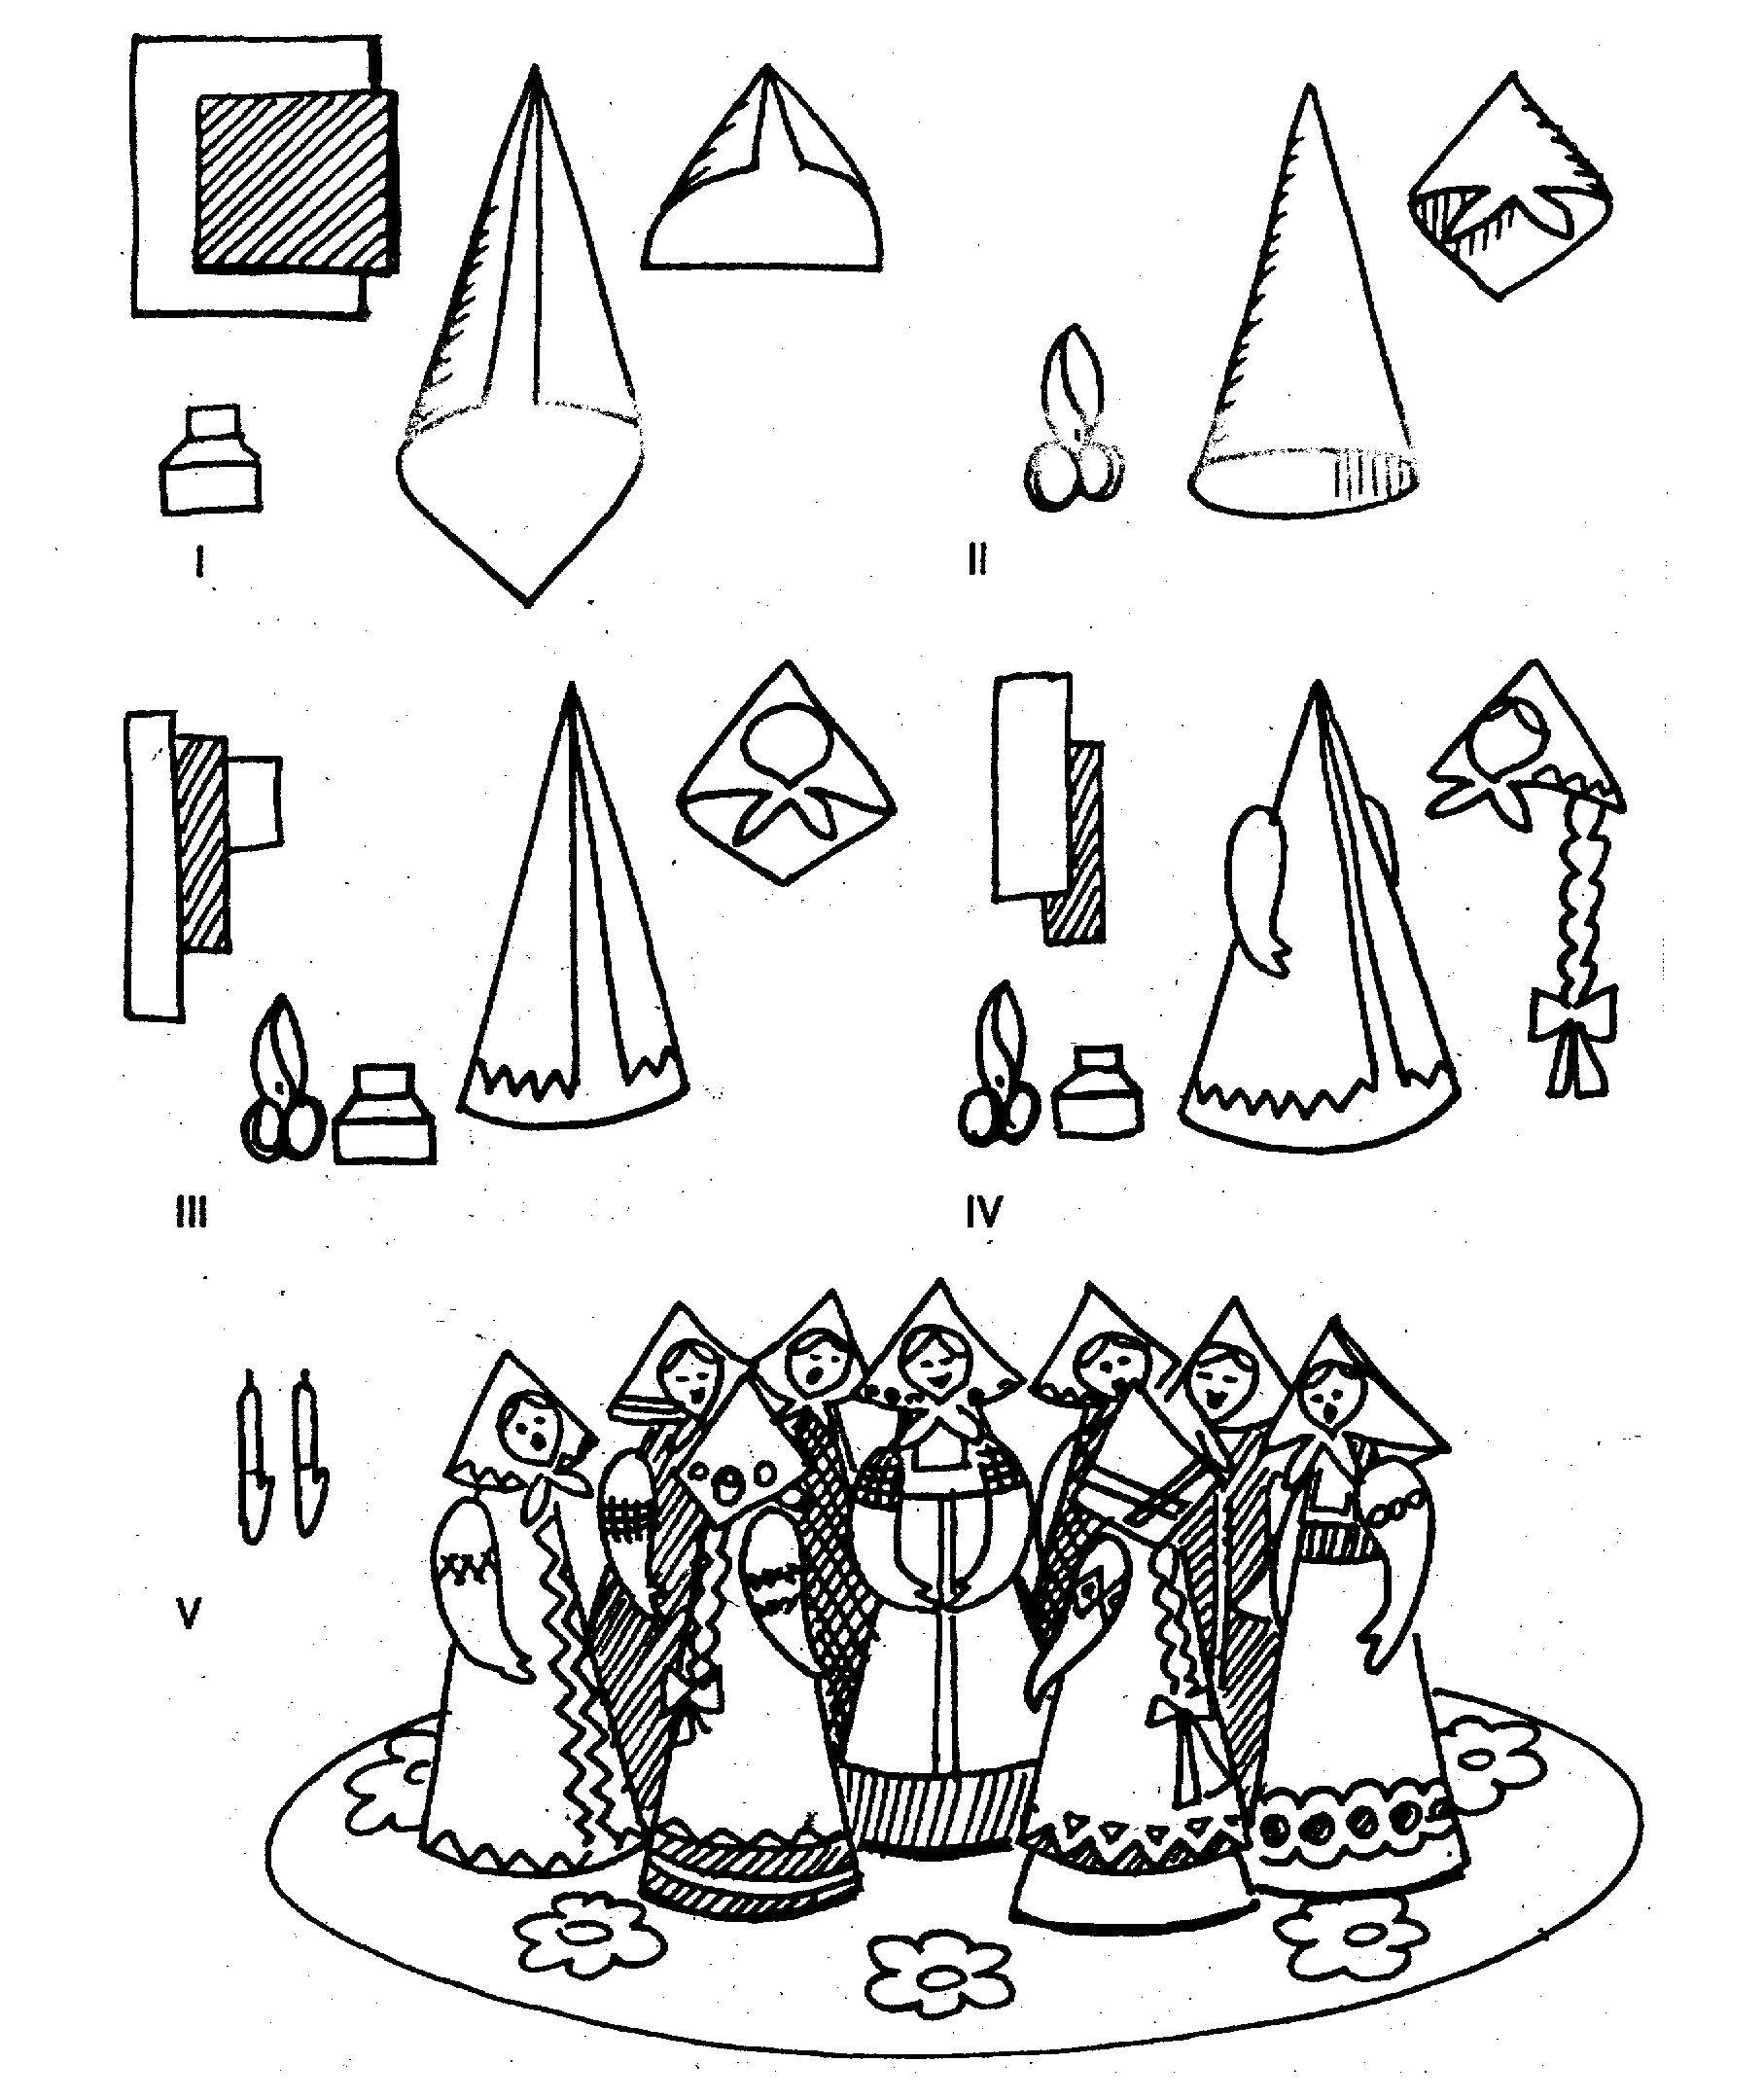 Coloring Paper dolls doll. Category toy. Tags:  toy, doll.